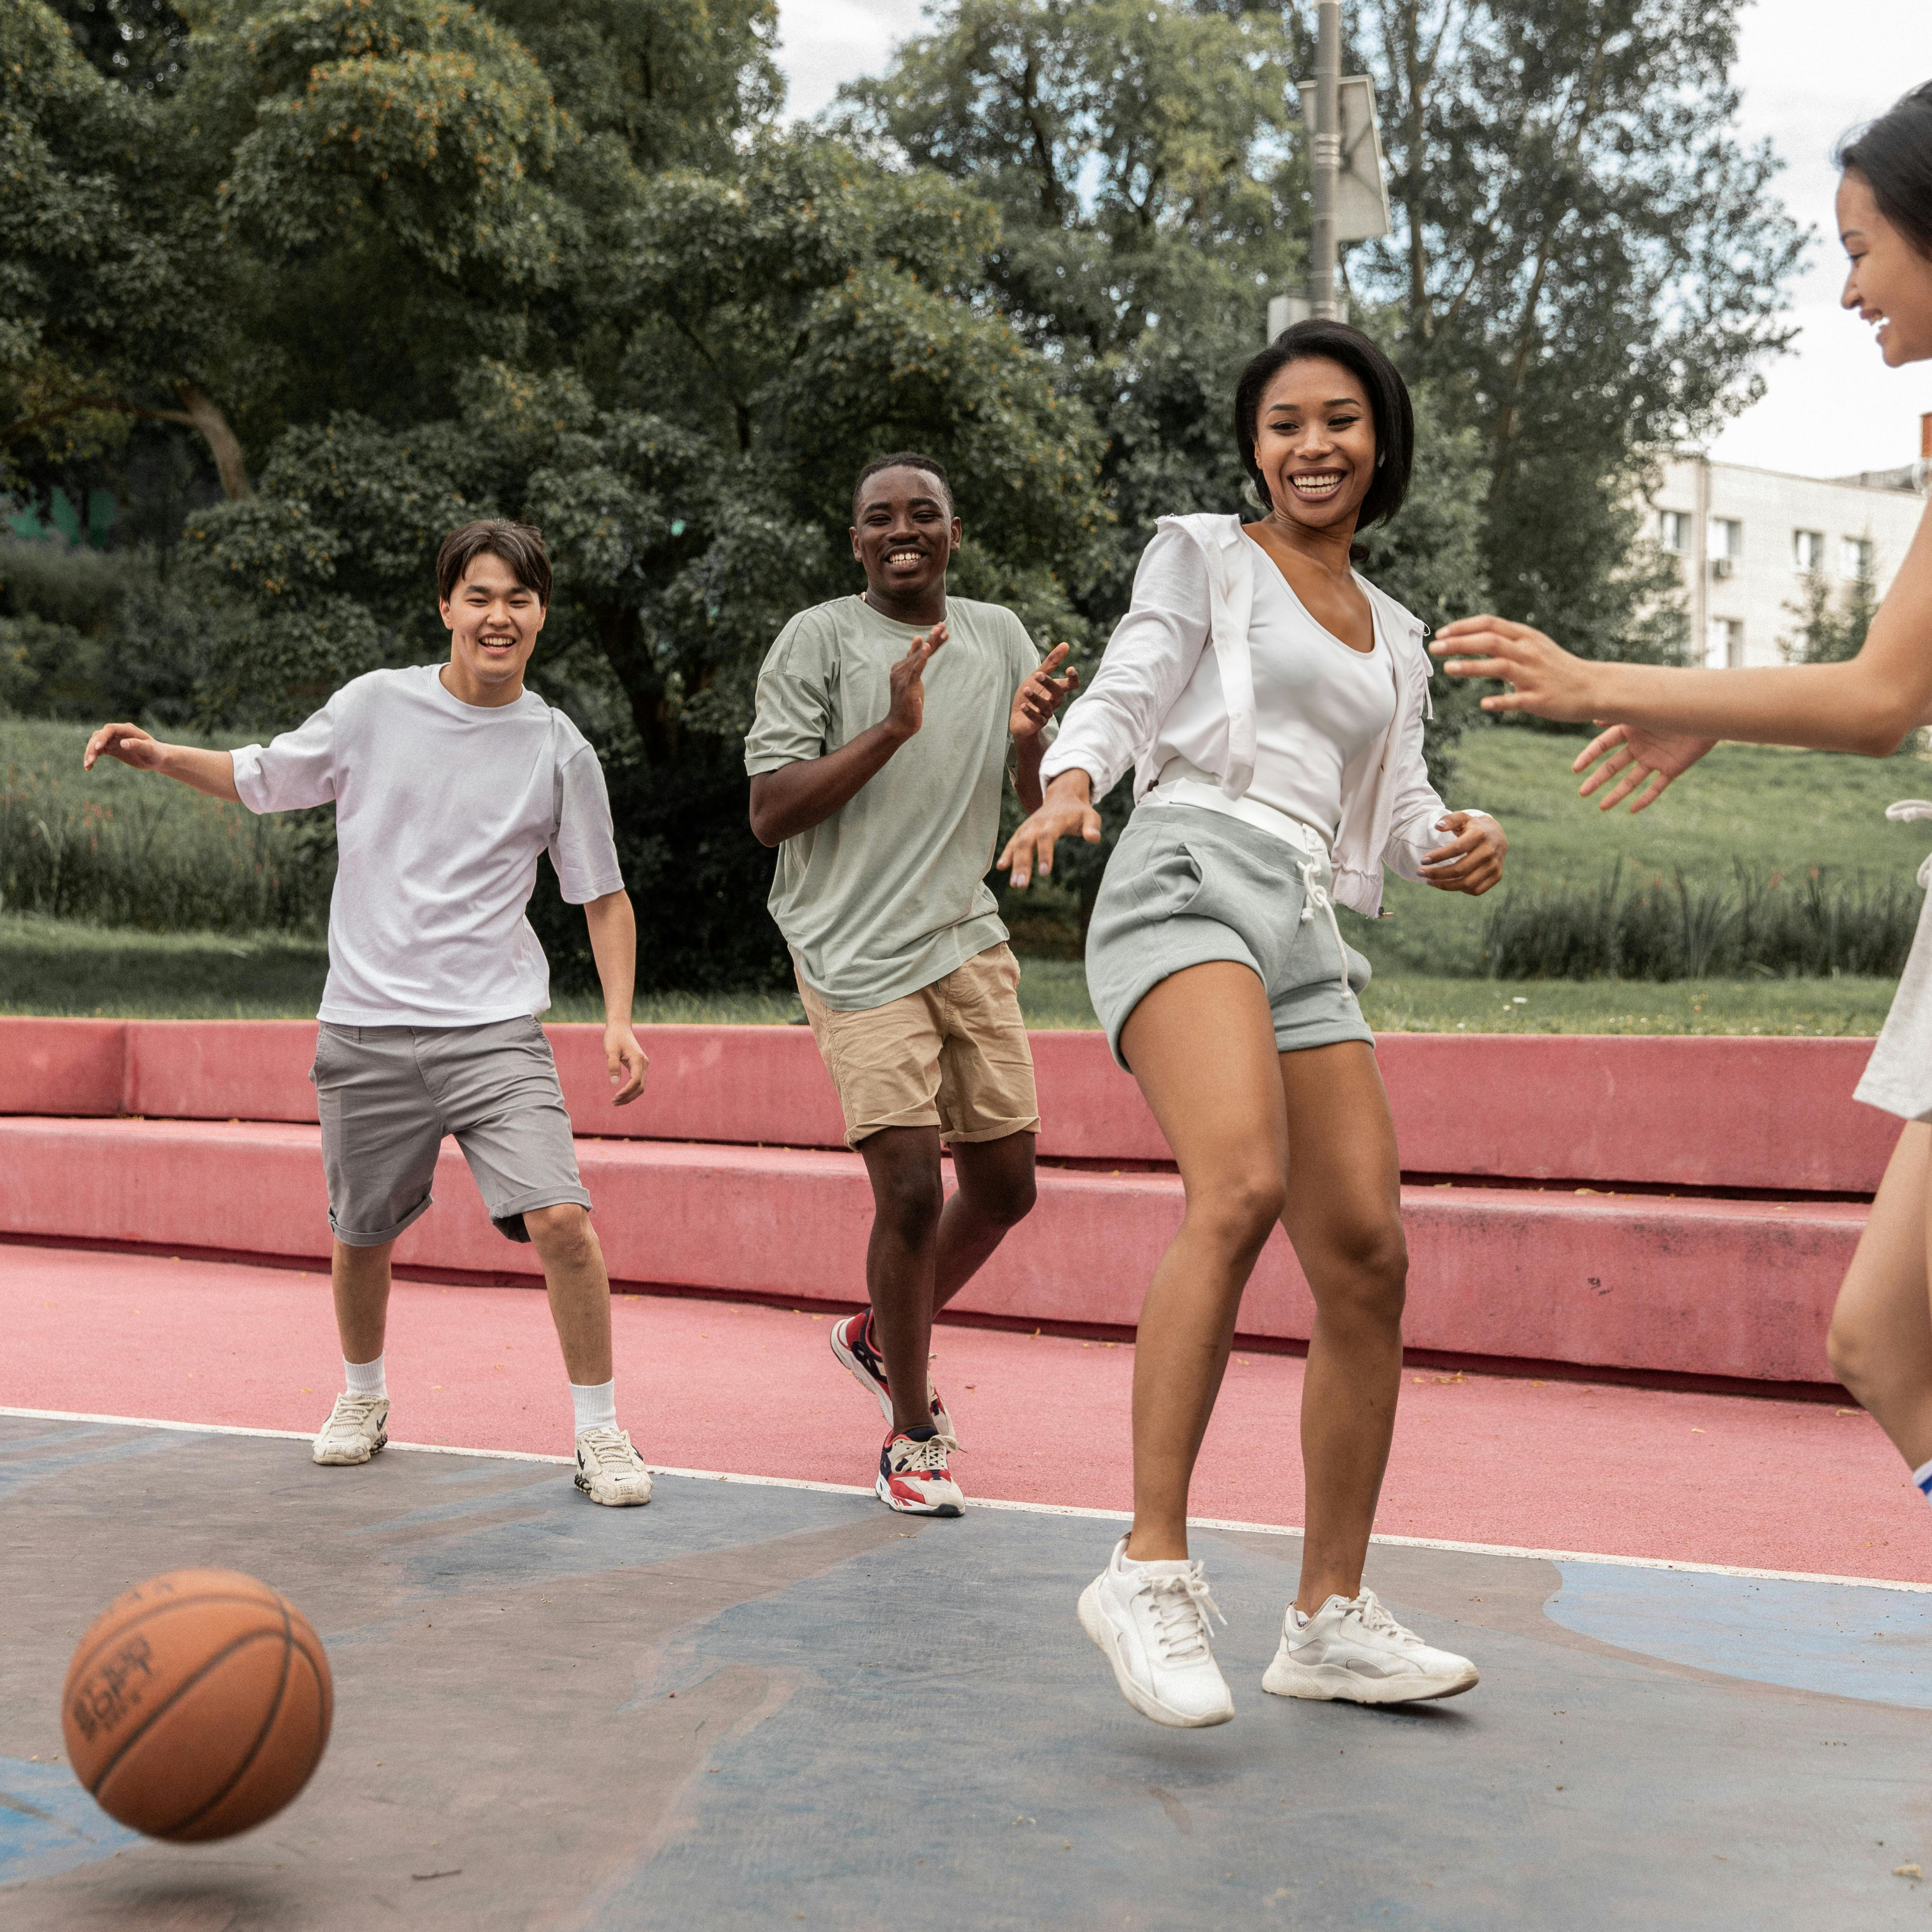 two girls and two boys playing basketball on an outdoor court